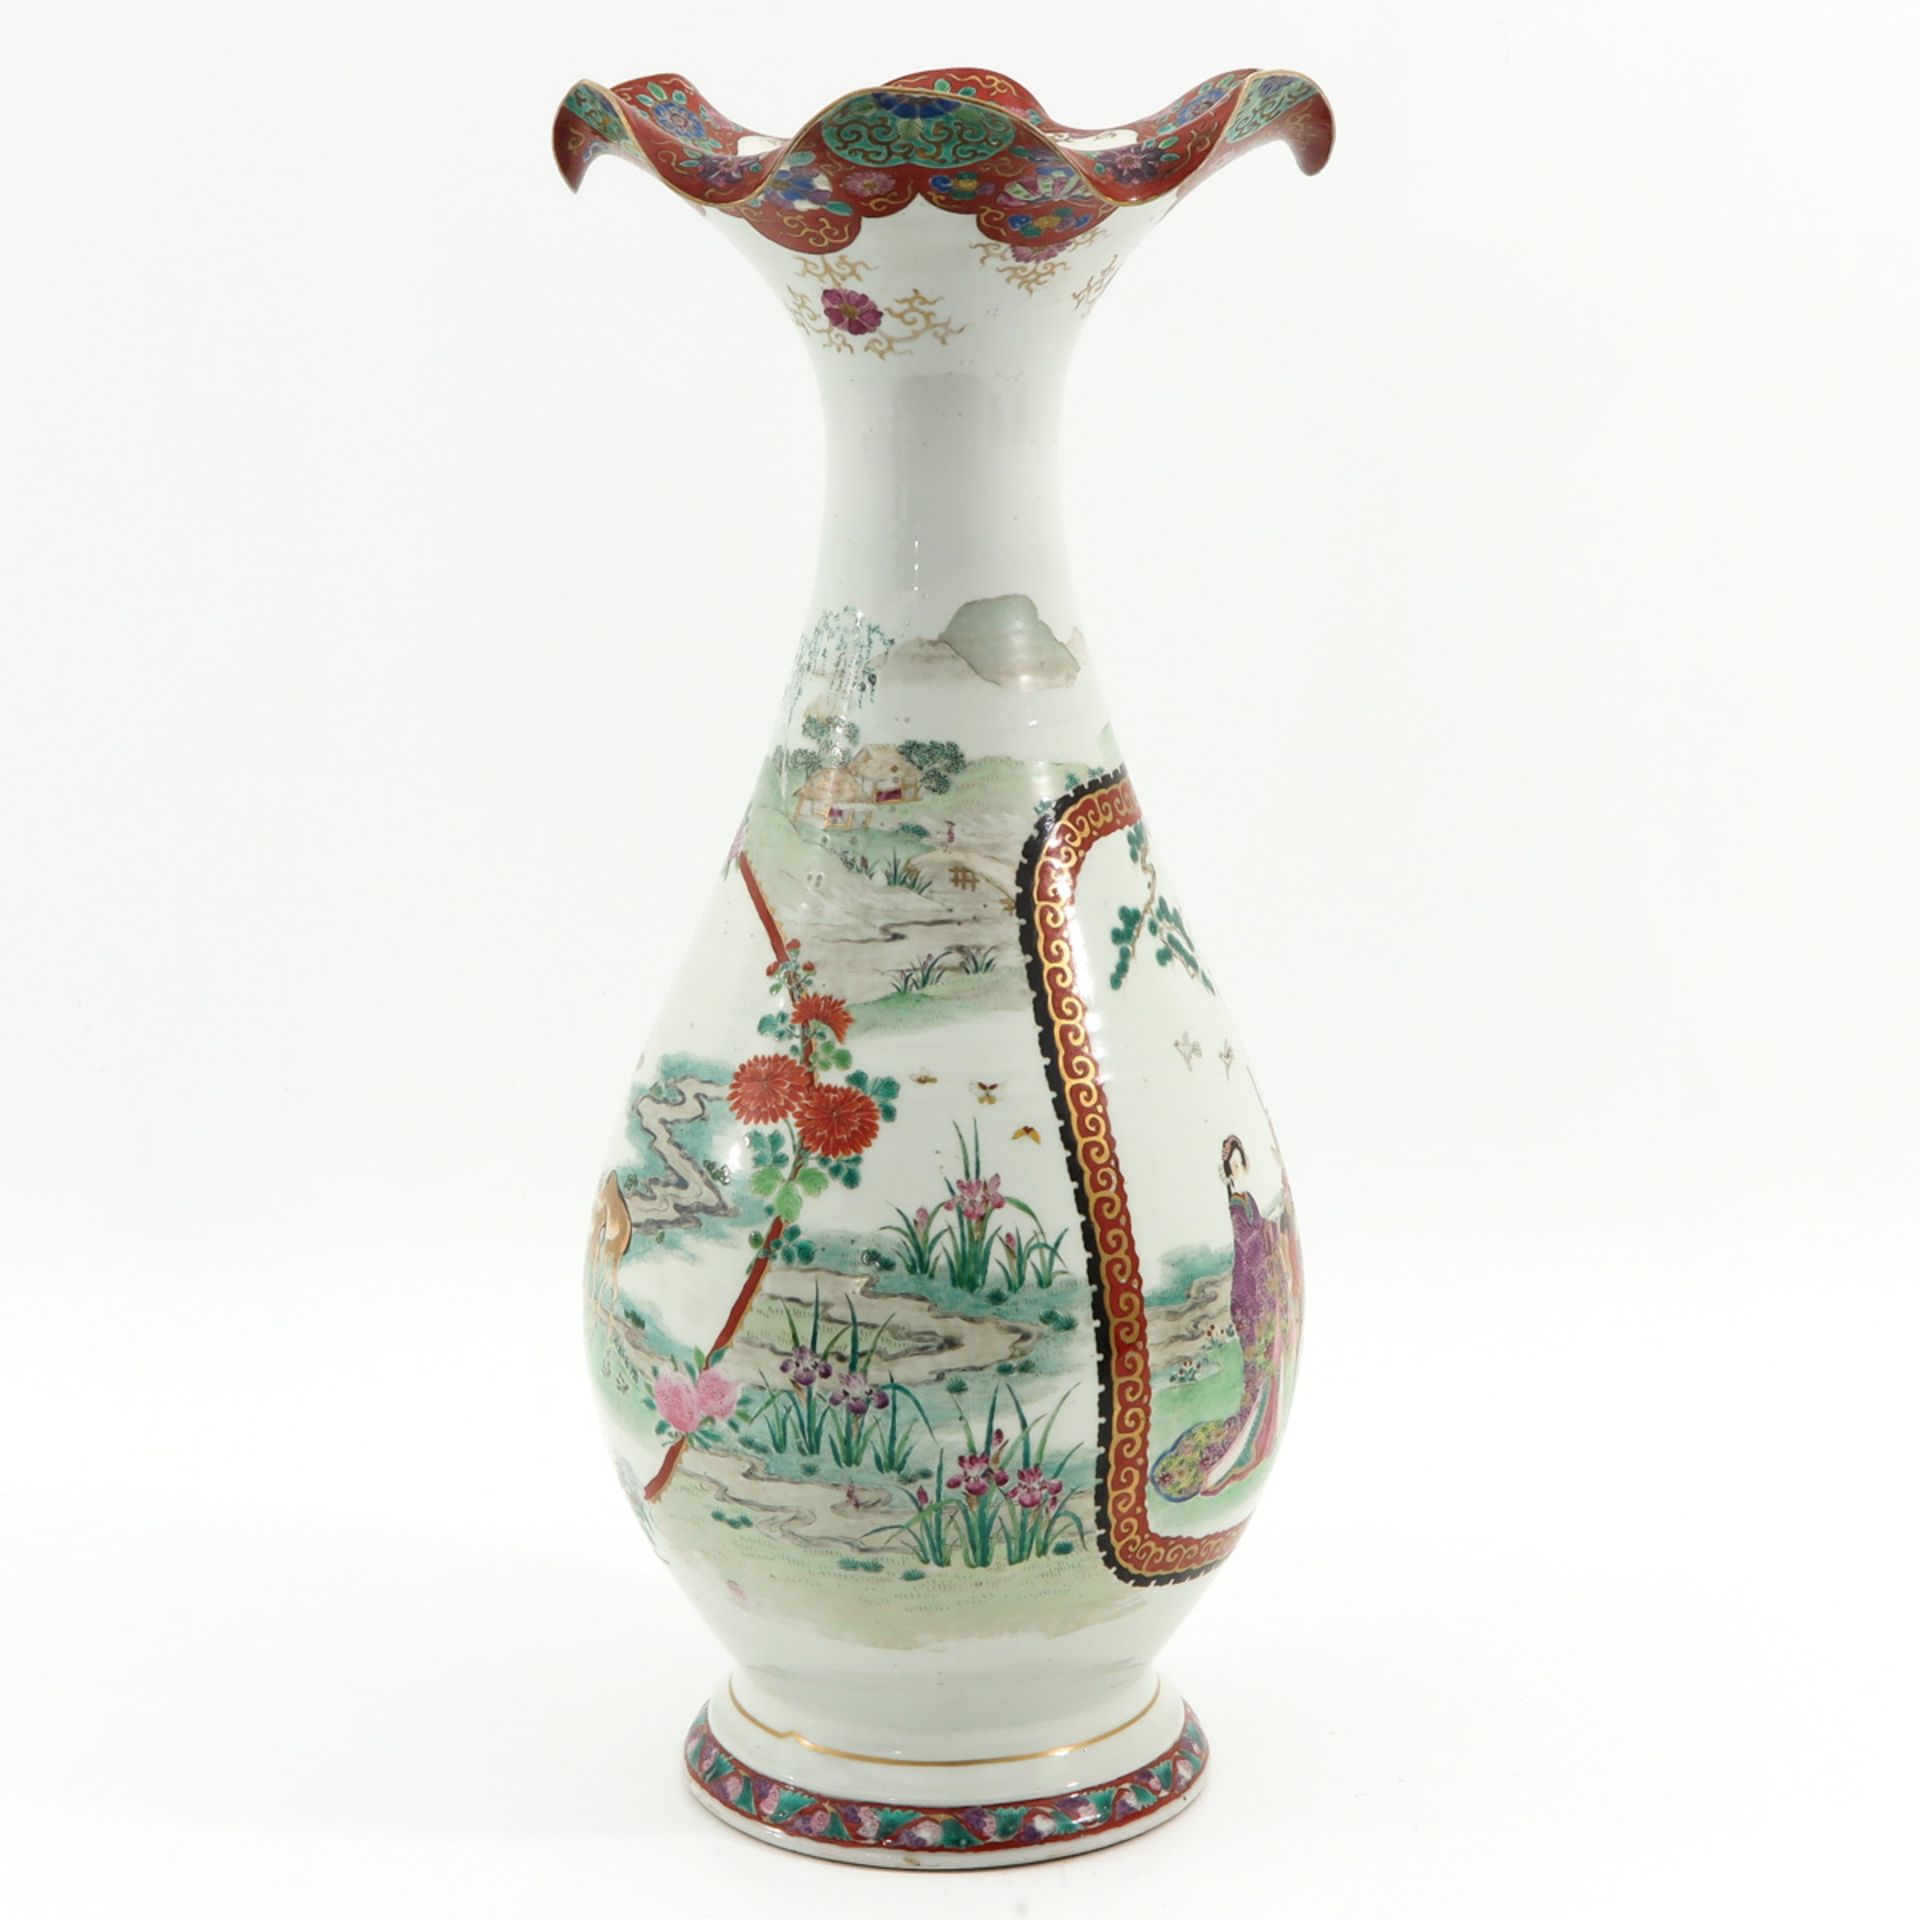 A Japanese Ruffle Top Vase - Image 4 of 10